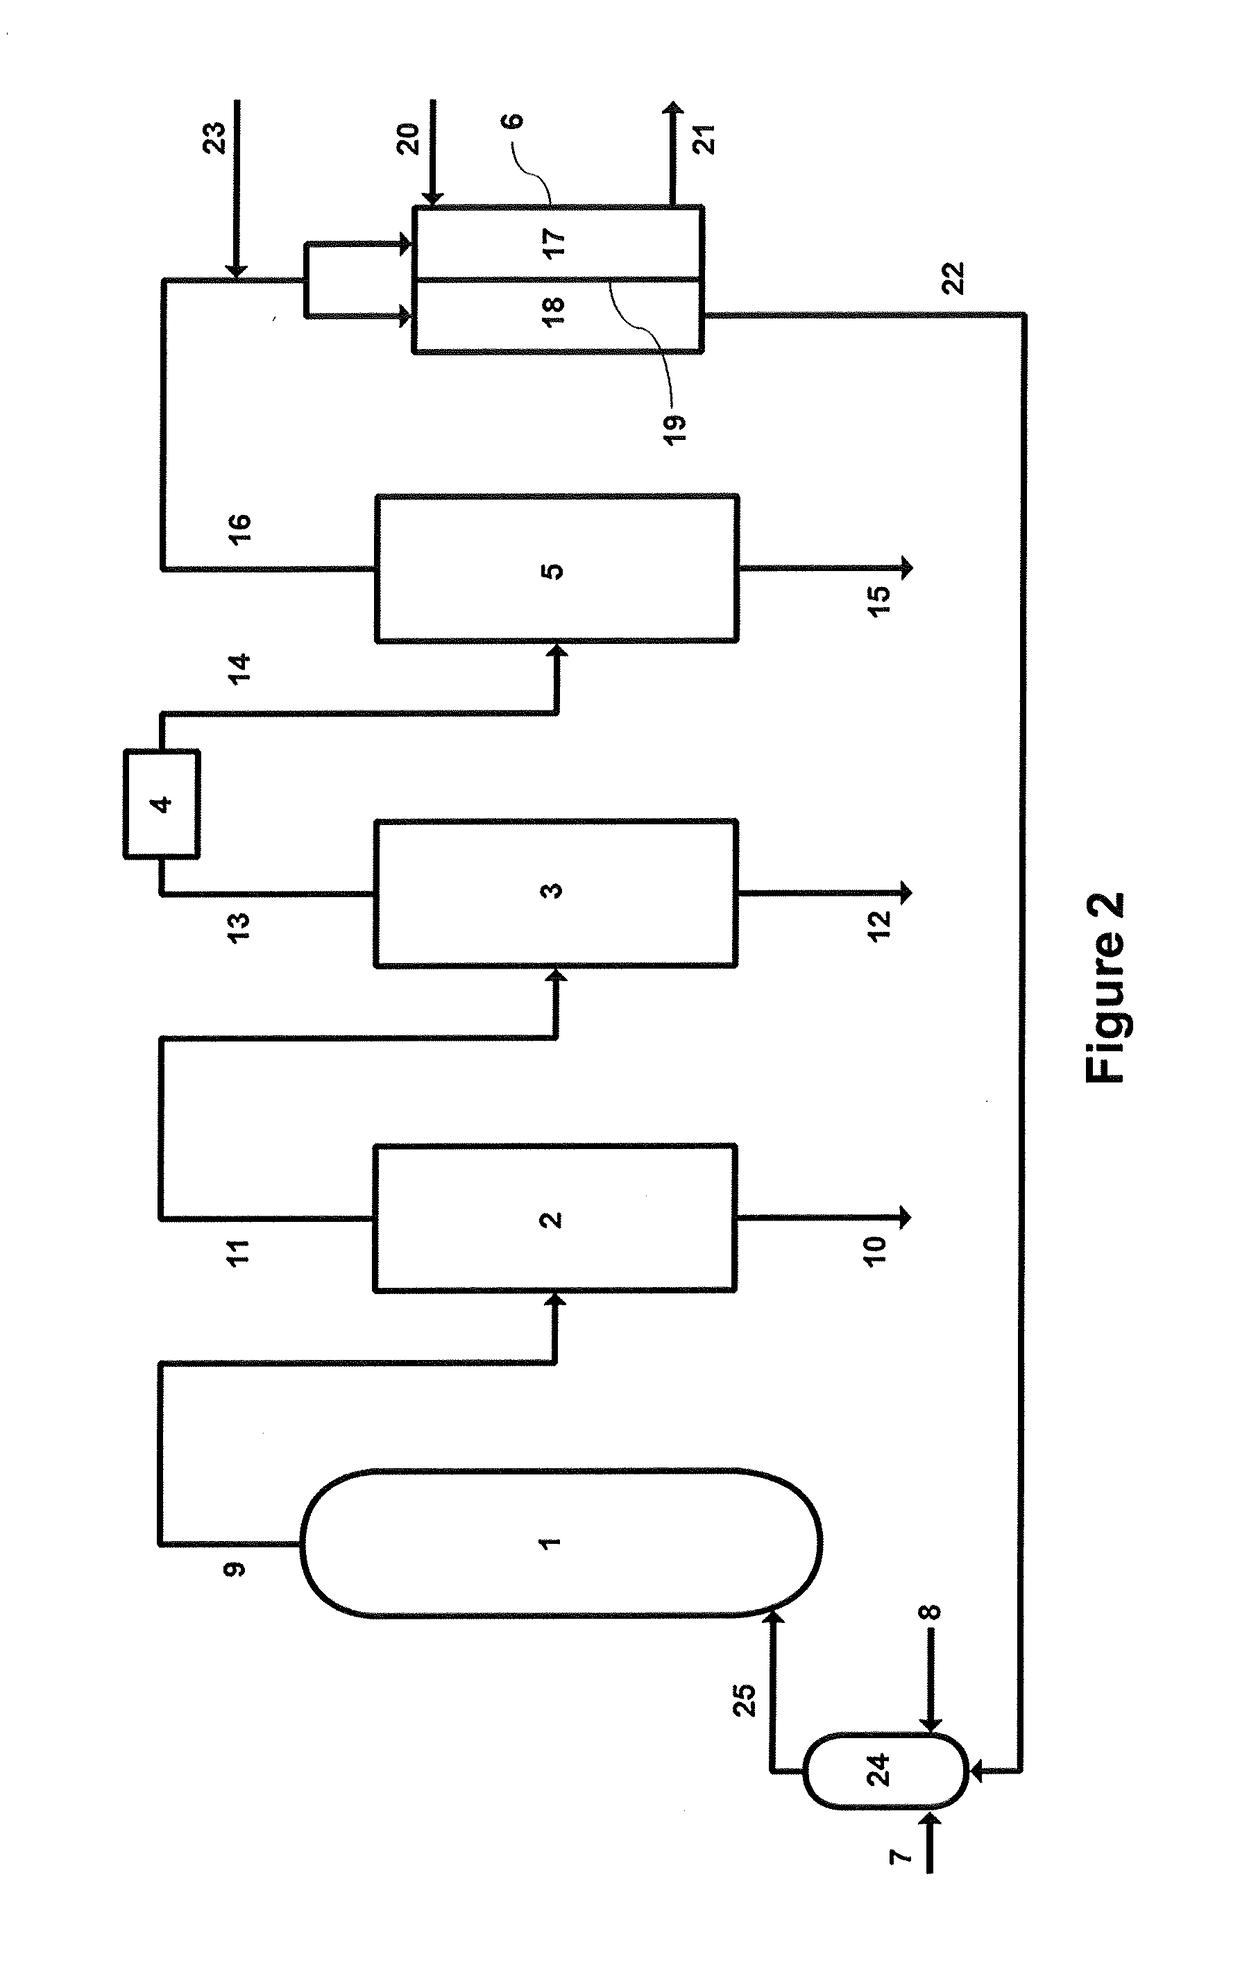 Complex comprising odh unit with integrated oxygen separation module